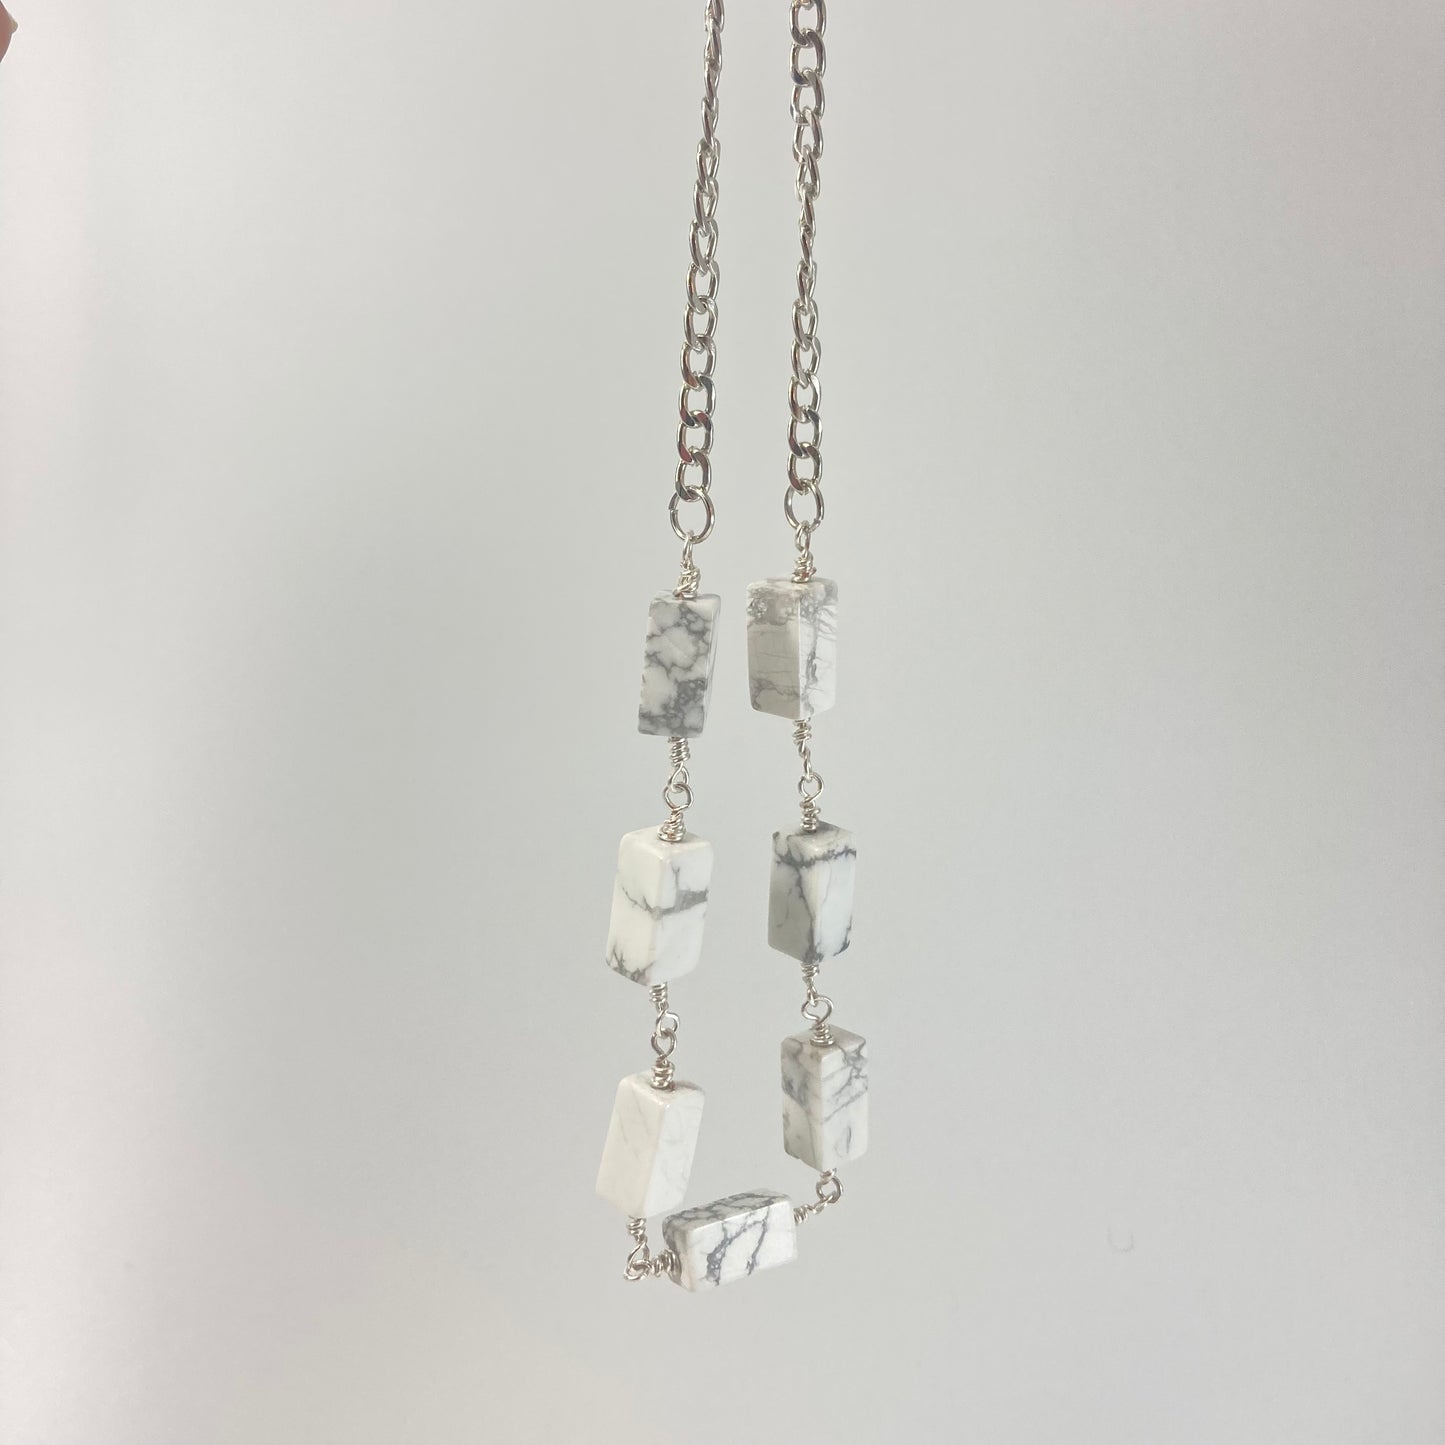 45N - White Marbled Bead Necklace